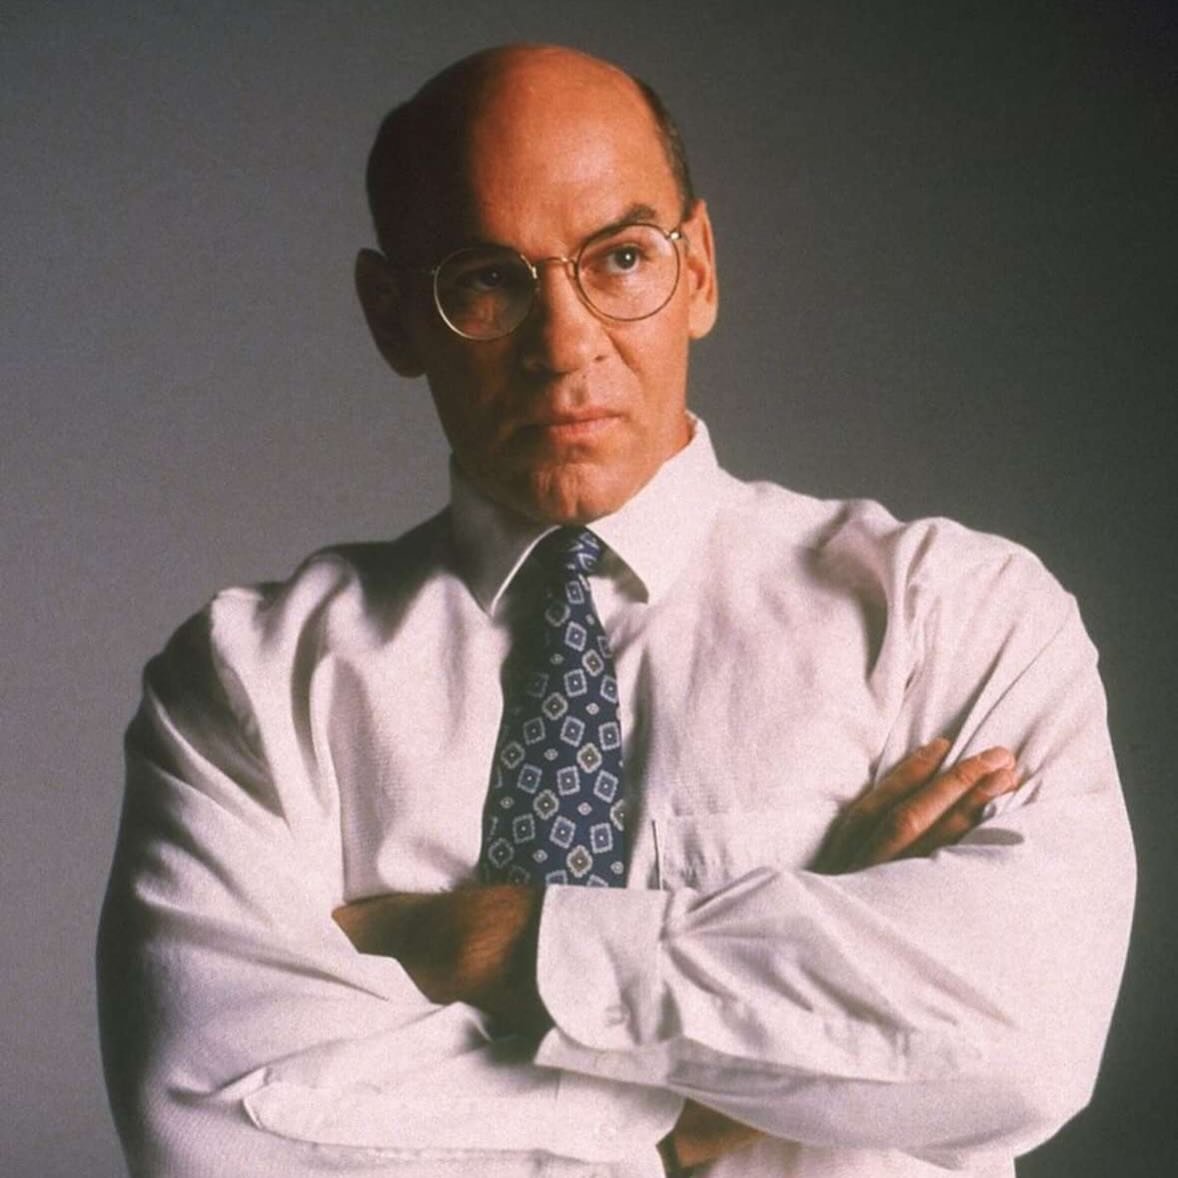 enough about Mulder &amp; Scully, we don&rsquo;t talk enough about the sex appeal of Walter Skinner
.
.
.
#xfiles #thexfiles #mulder #mulderandscully #walterskinner